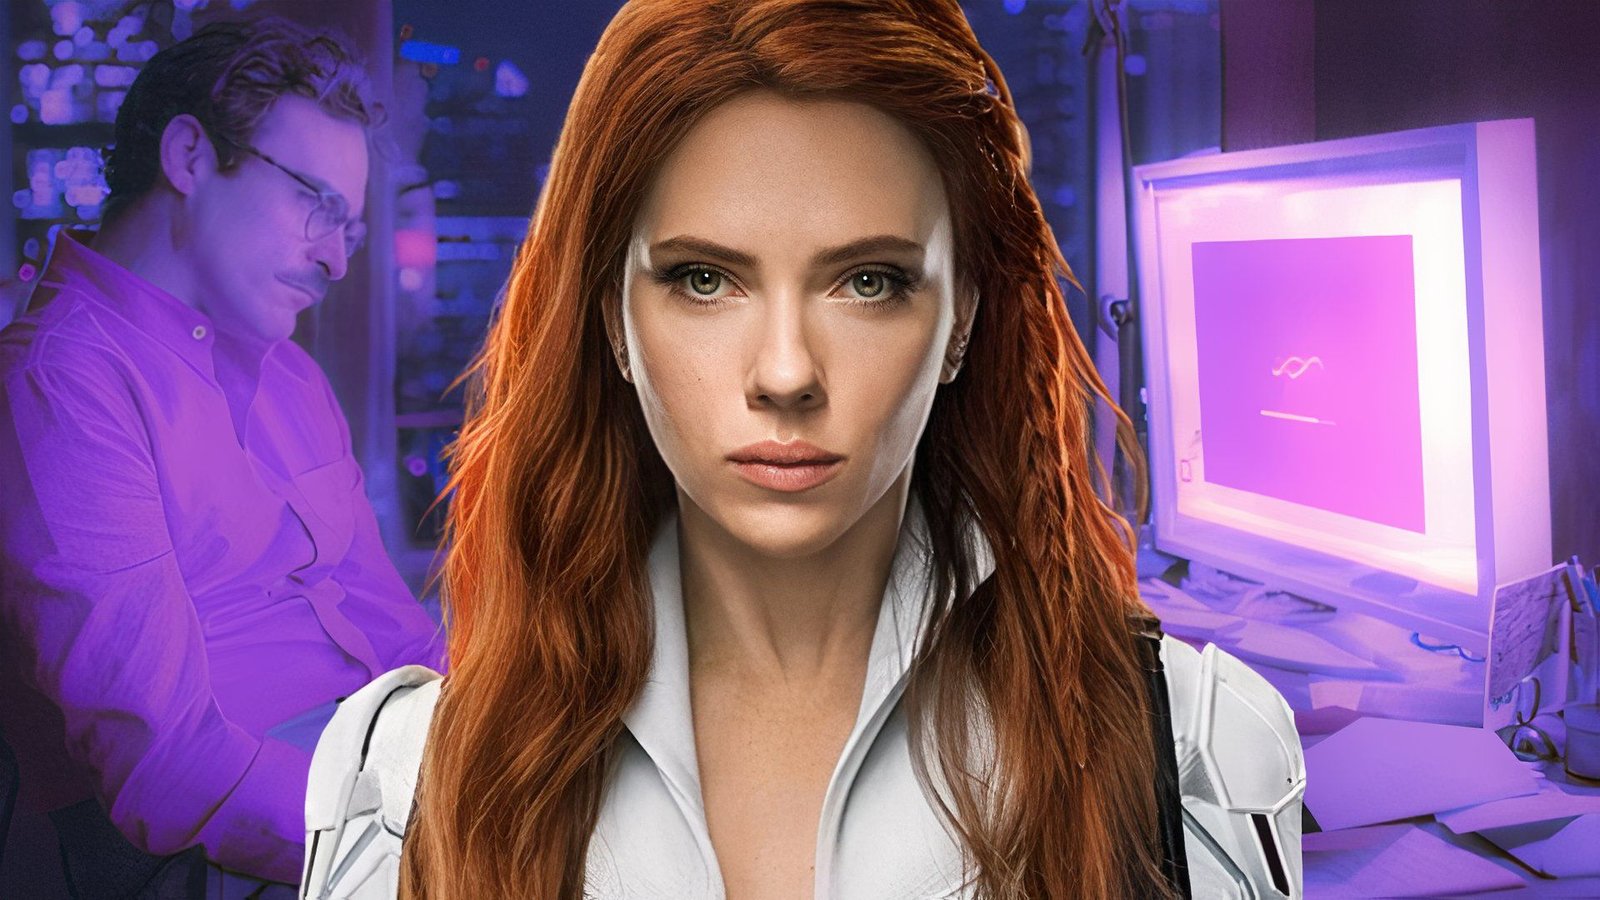 Scarlett Johansson Is 'Shocked' & 'Angered' at Unauthorized Use of Voice for ChatGPT